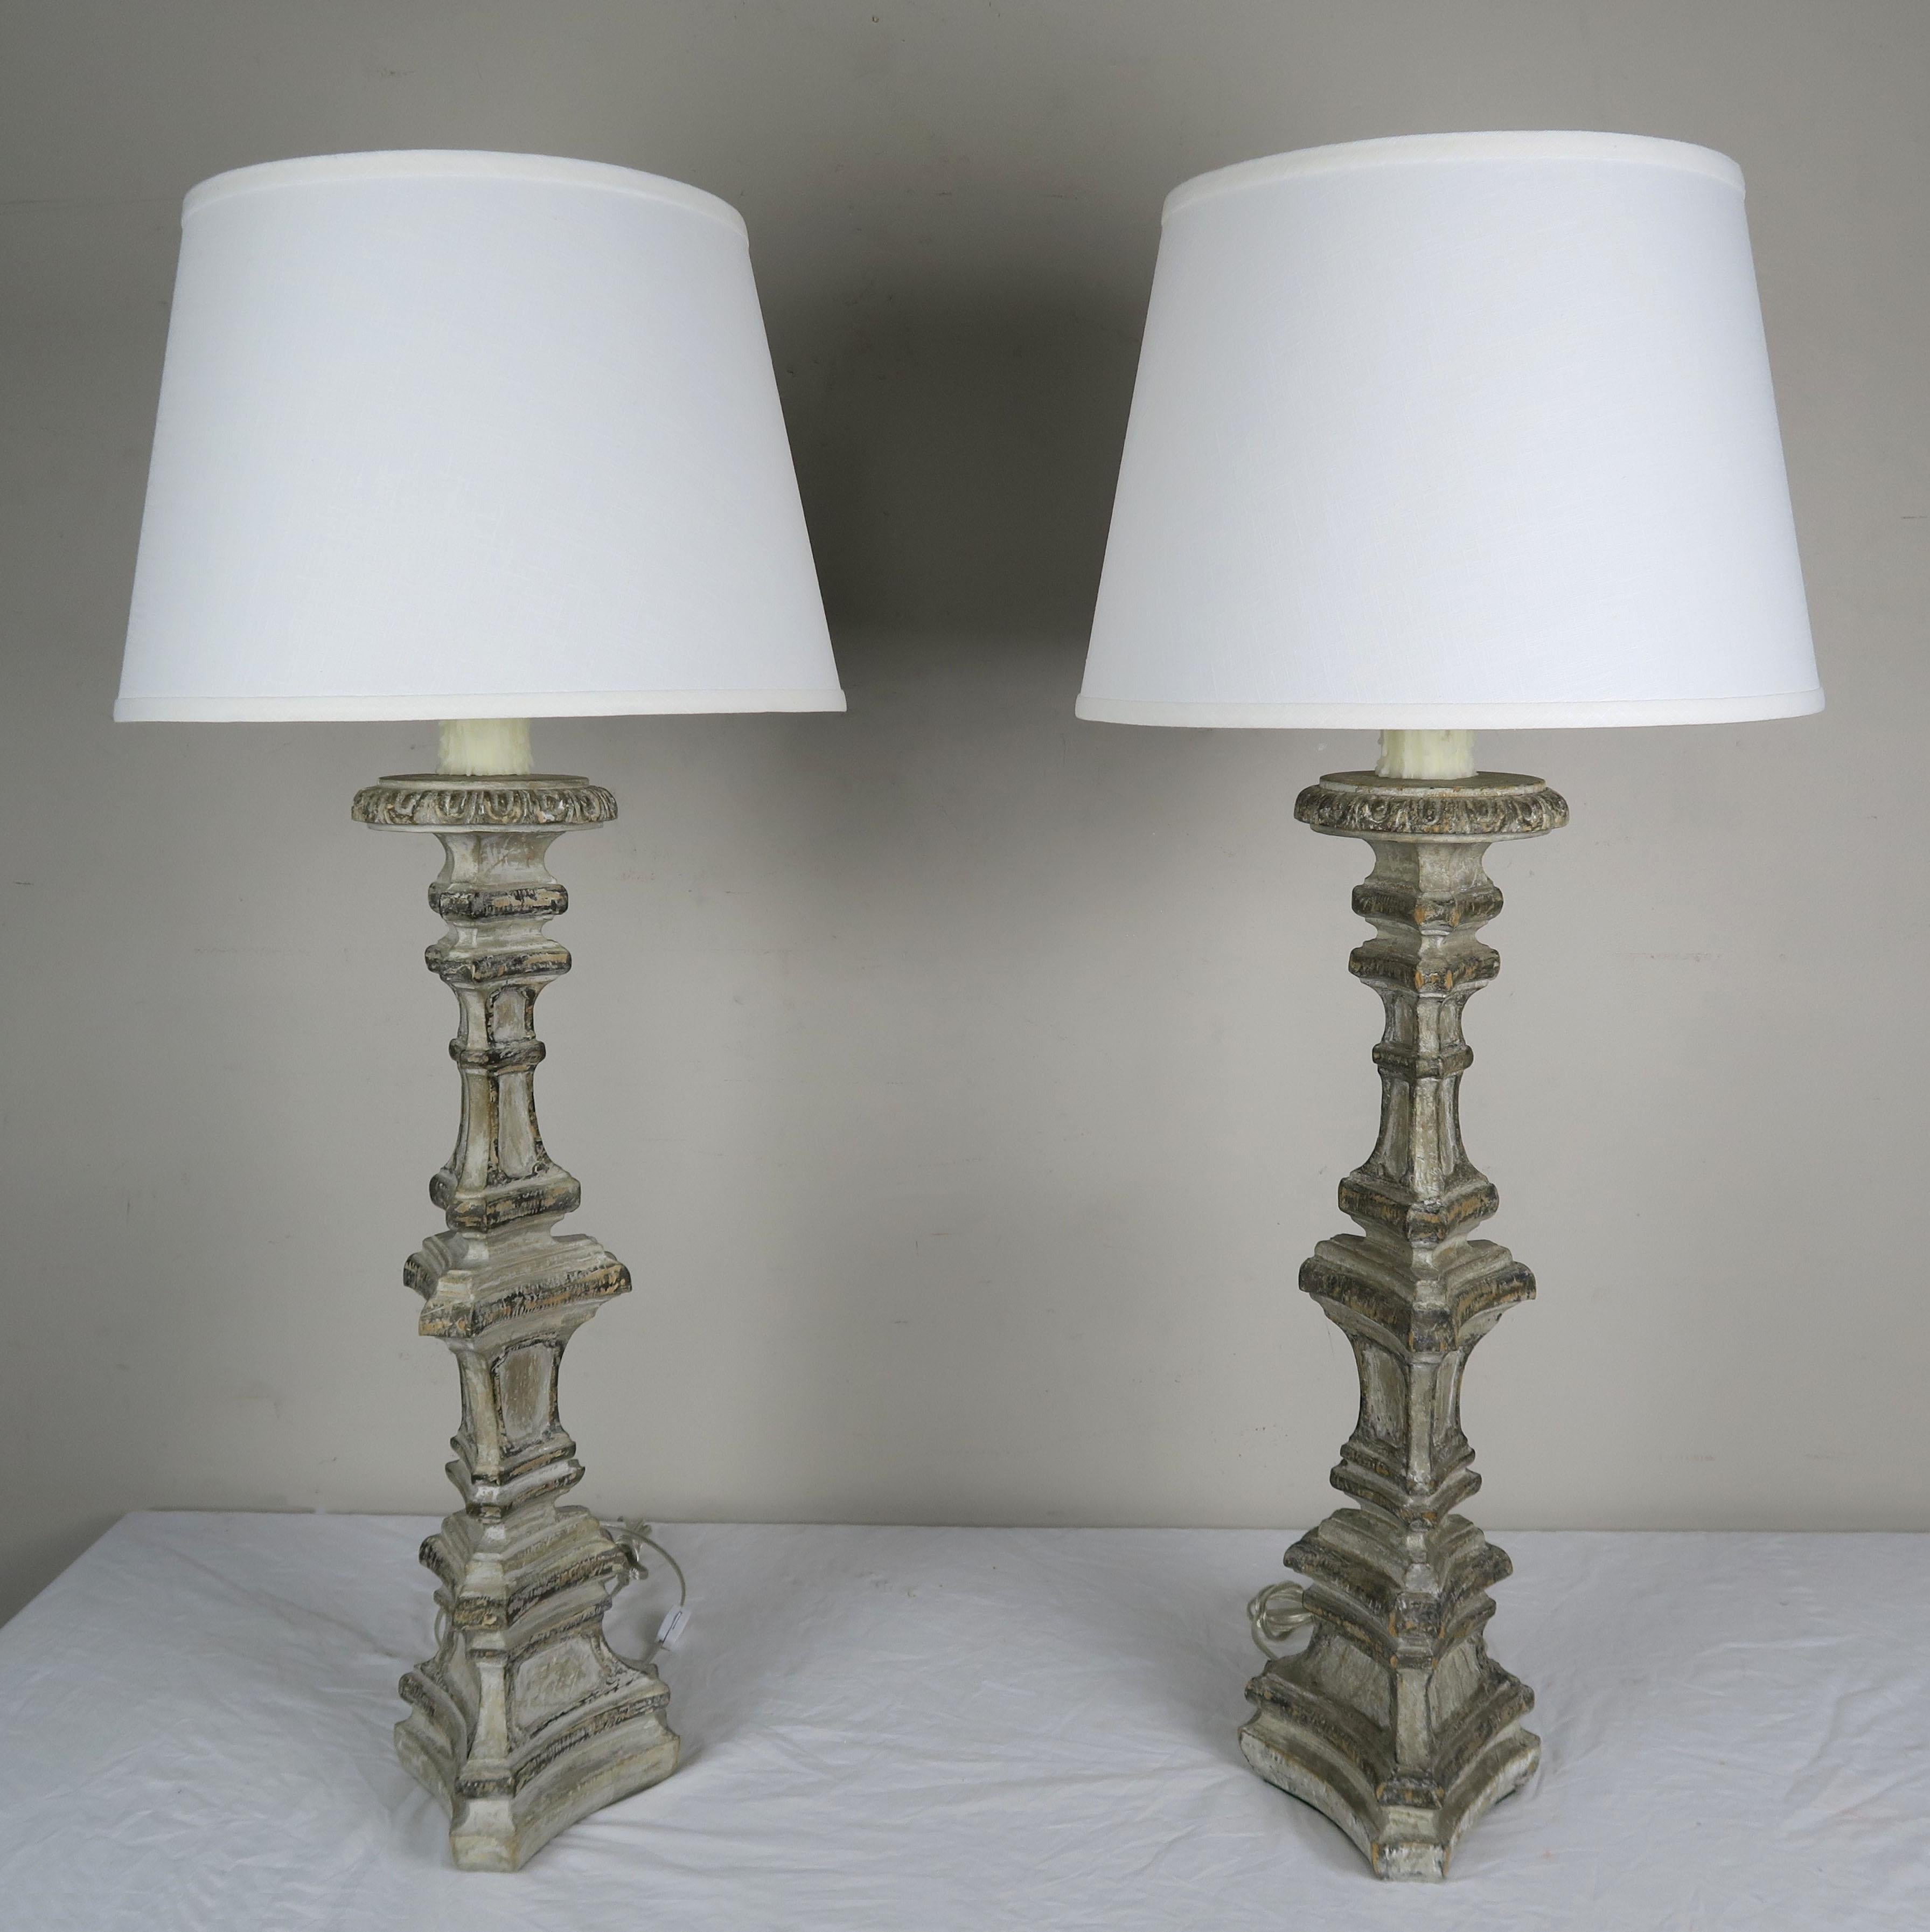 Pair of Italian painted candlesticks that have been wired into lamps and crowned with crisp white linen shades.